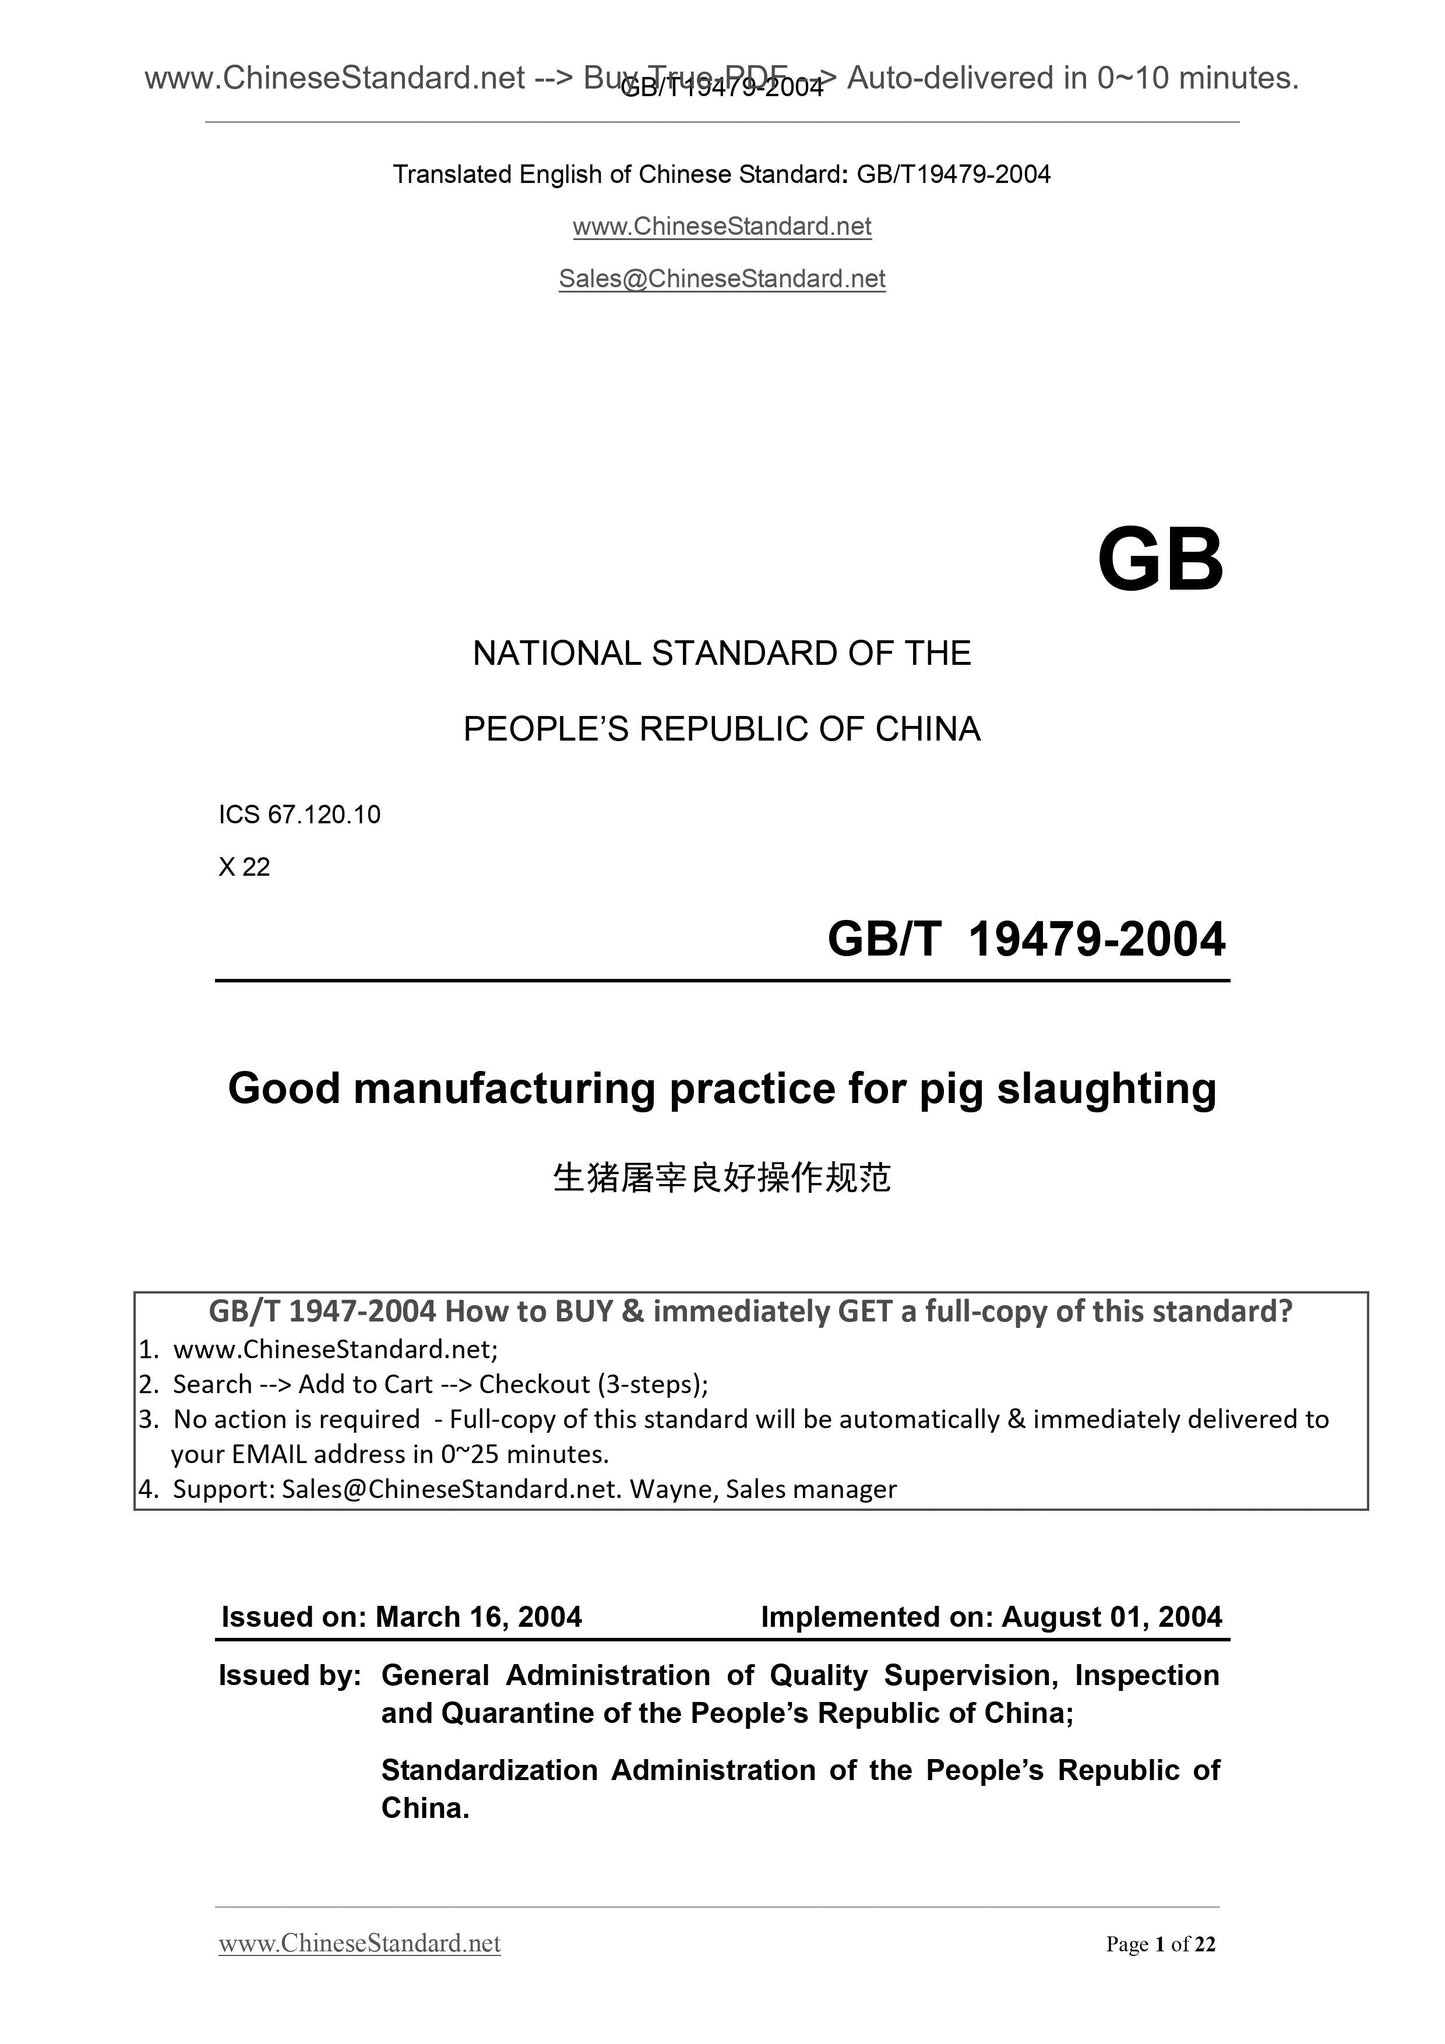 GB/T 19479-2004 Page 1